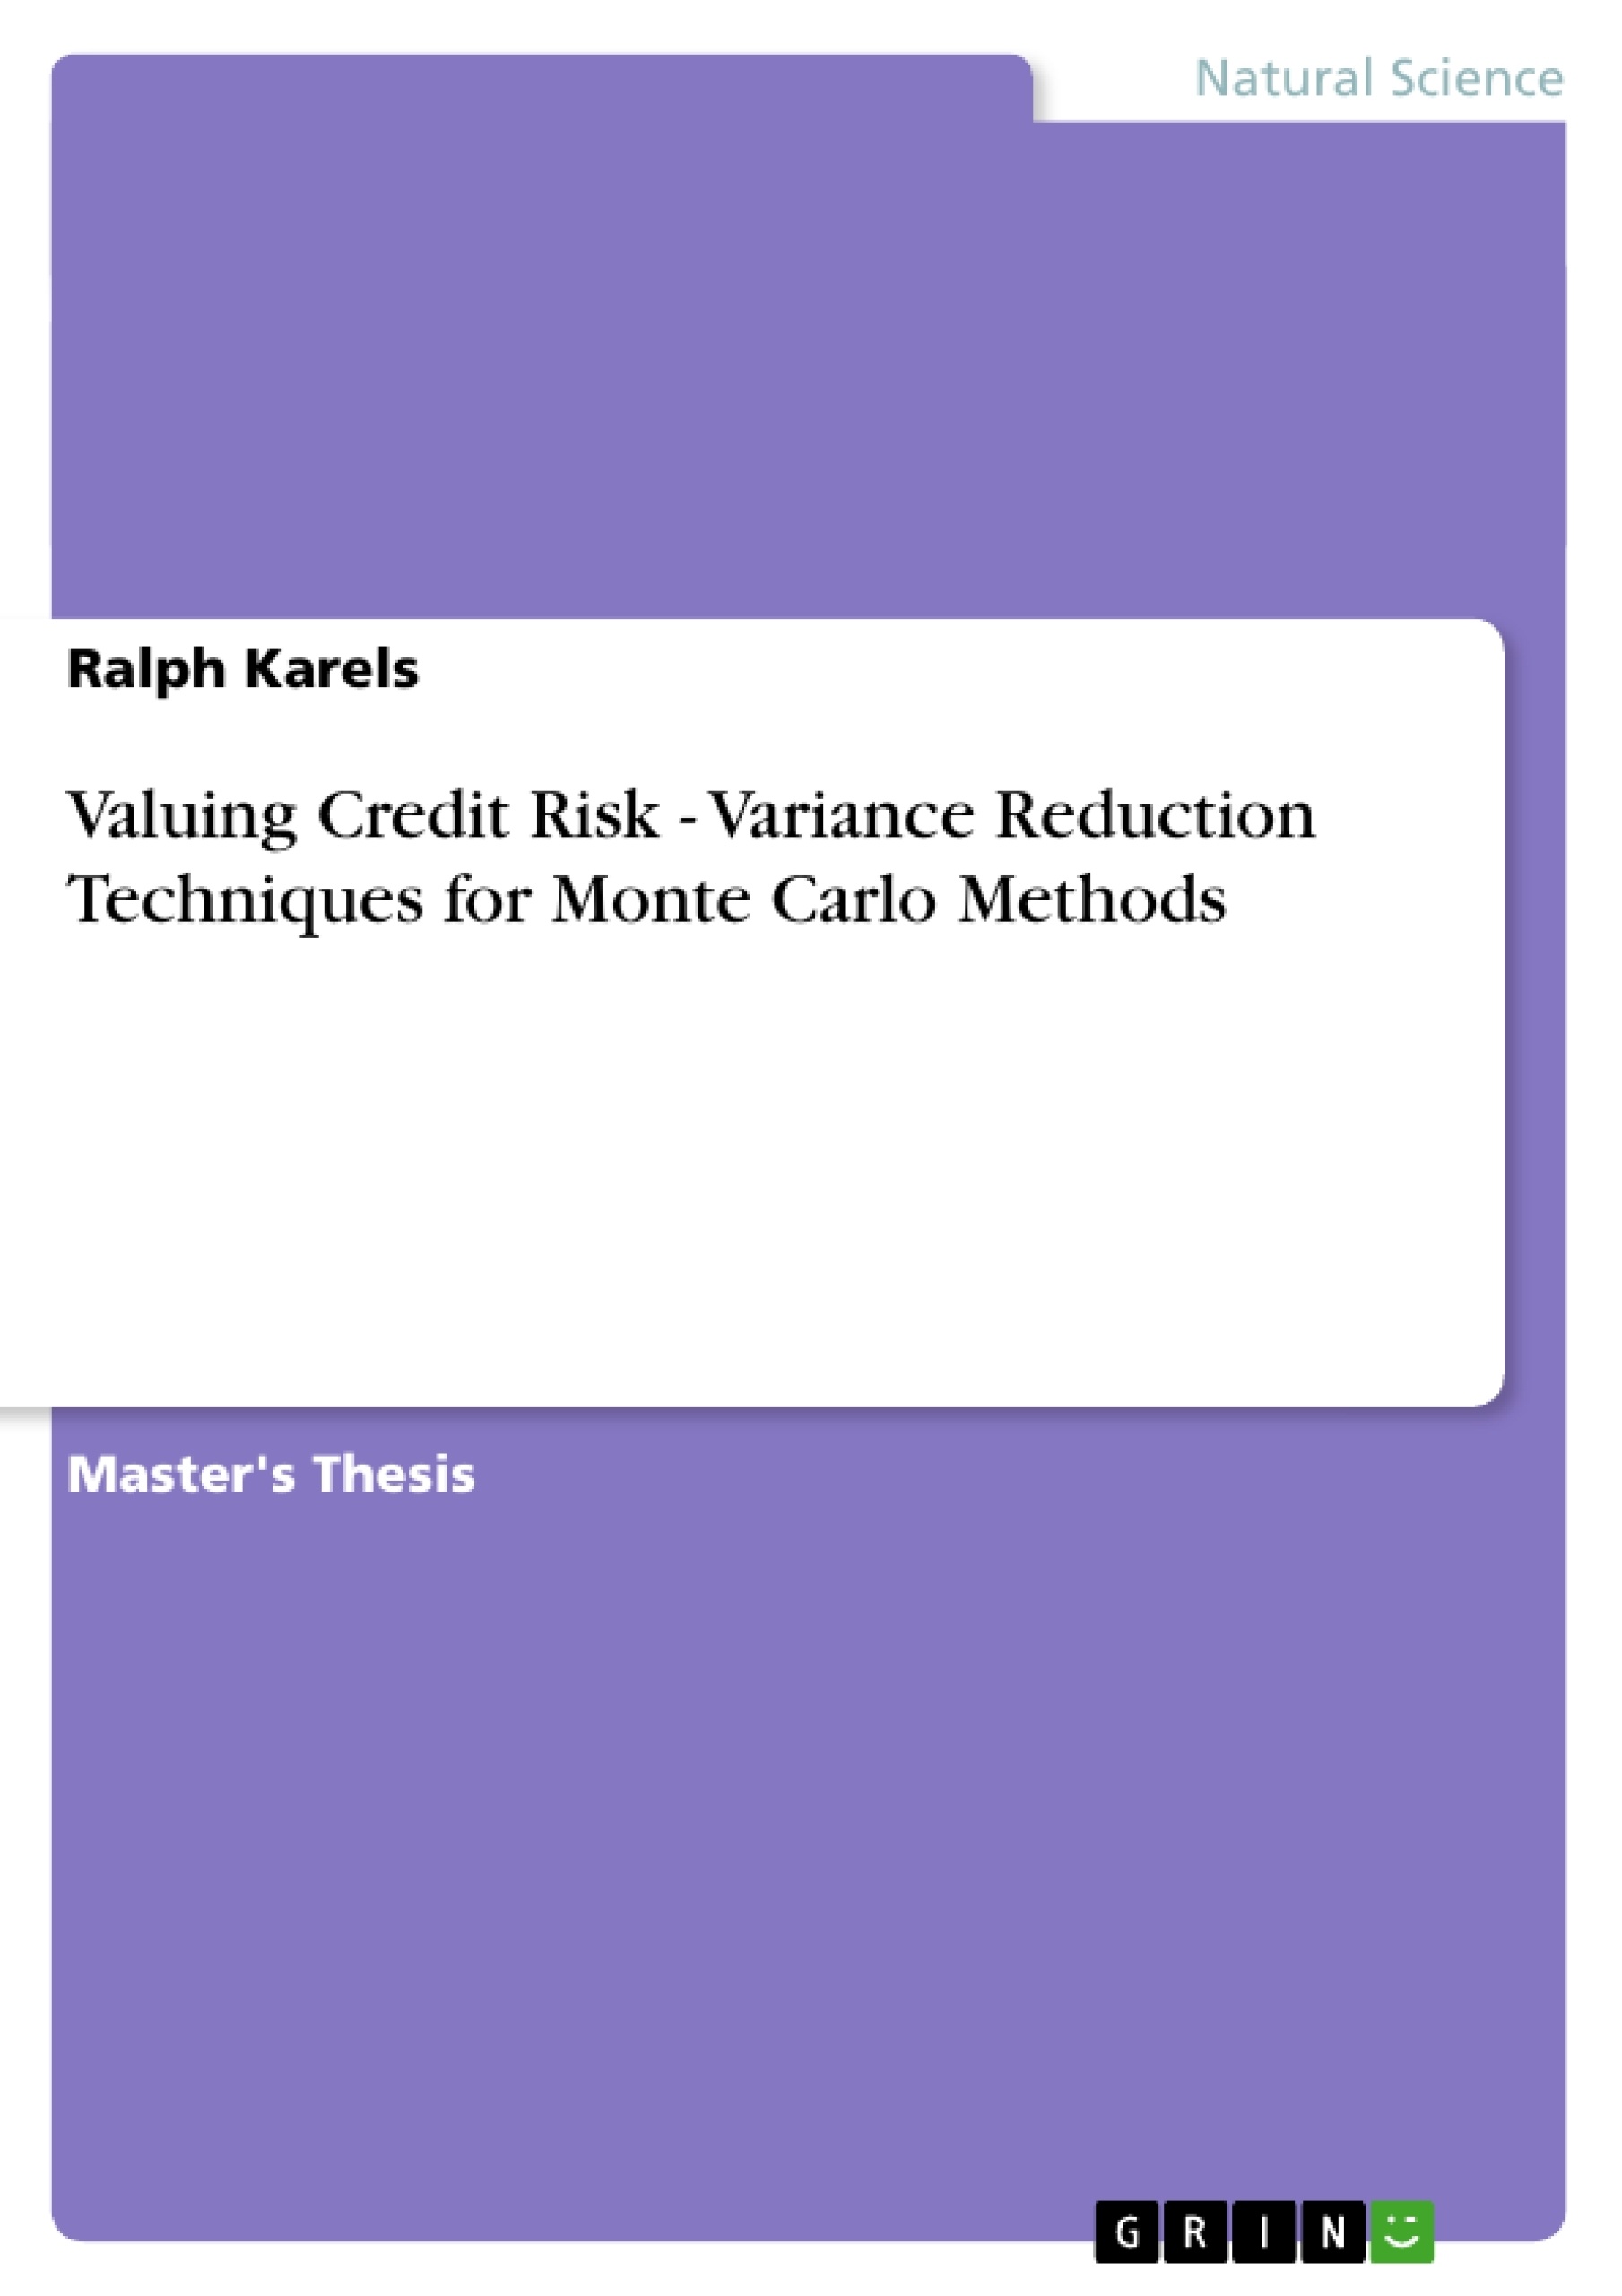 Título: Valuing Credit Risk - Variance Reduction Techniques for Monte Carlo Methods